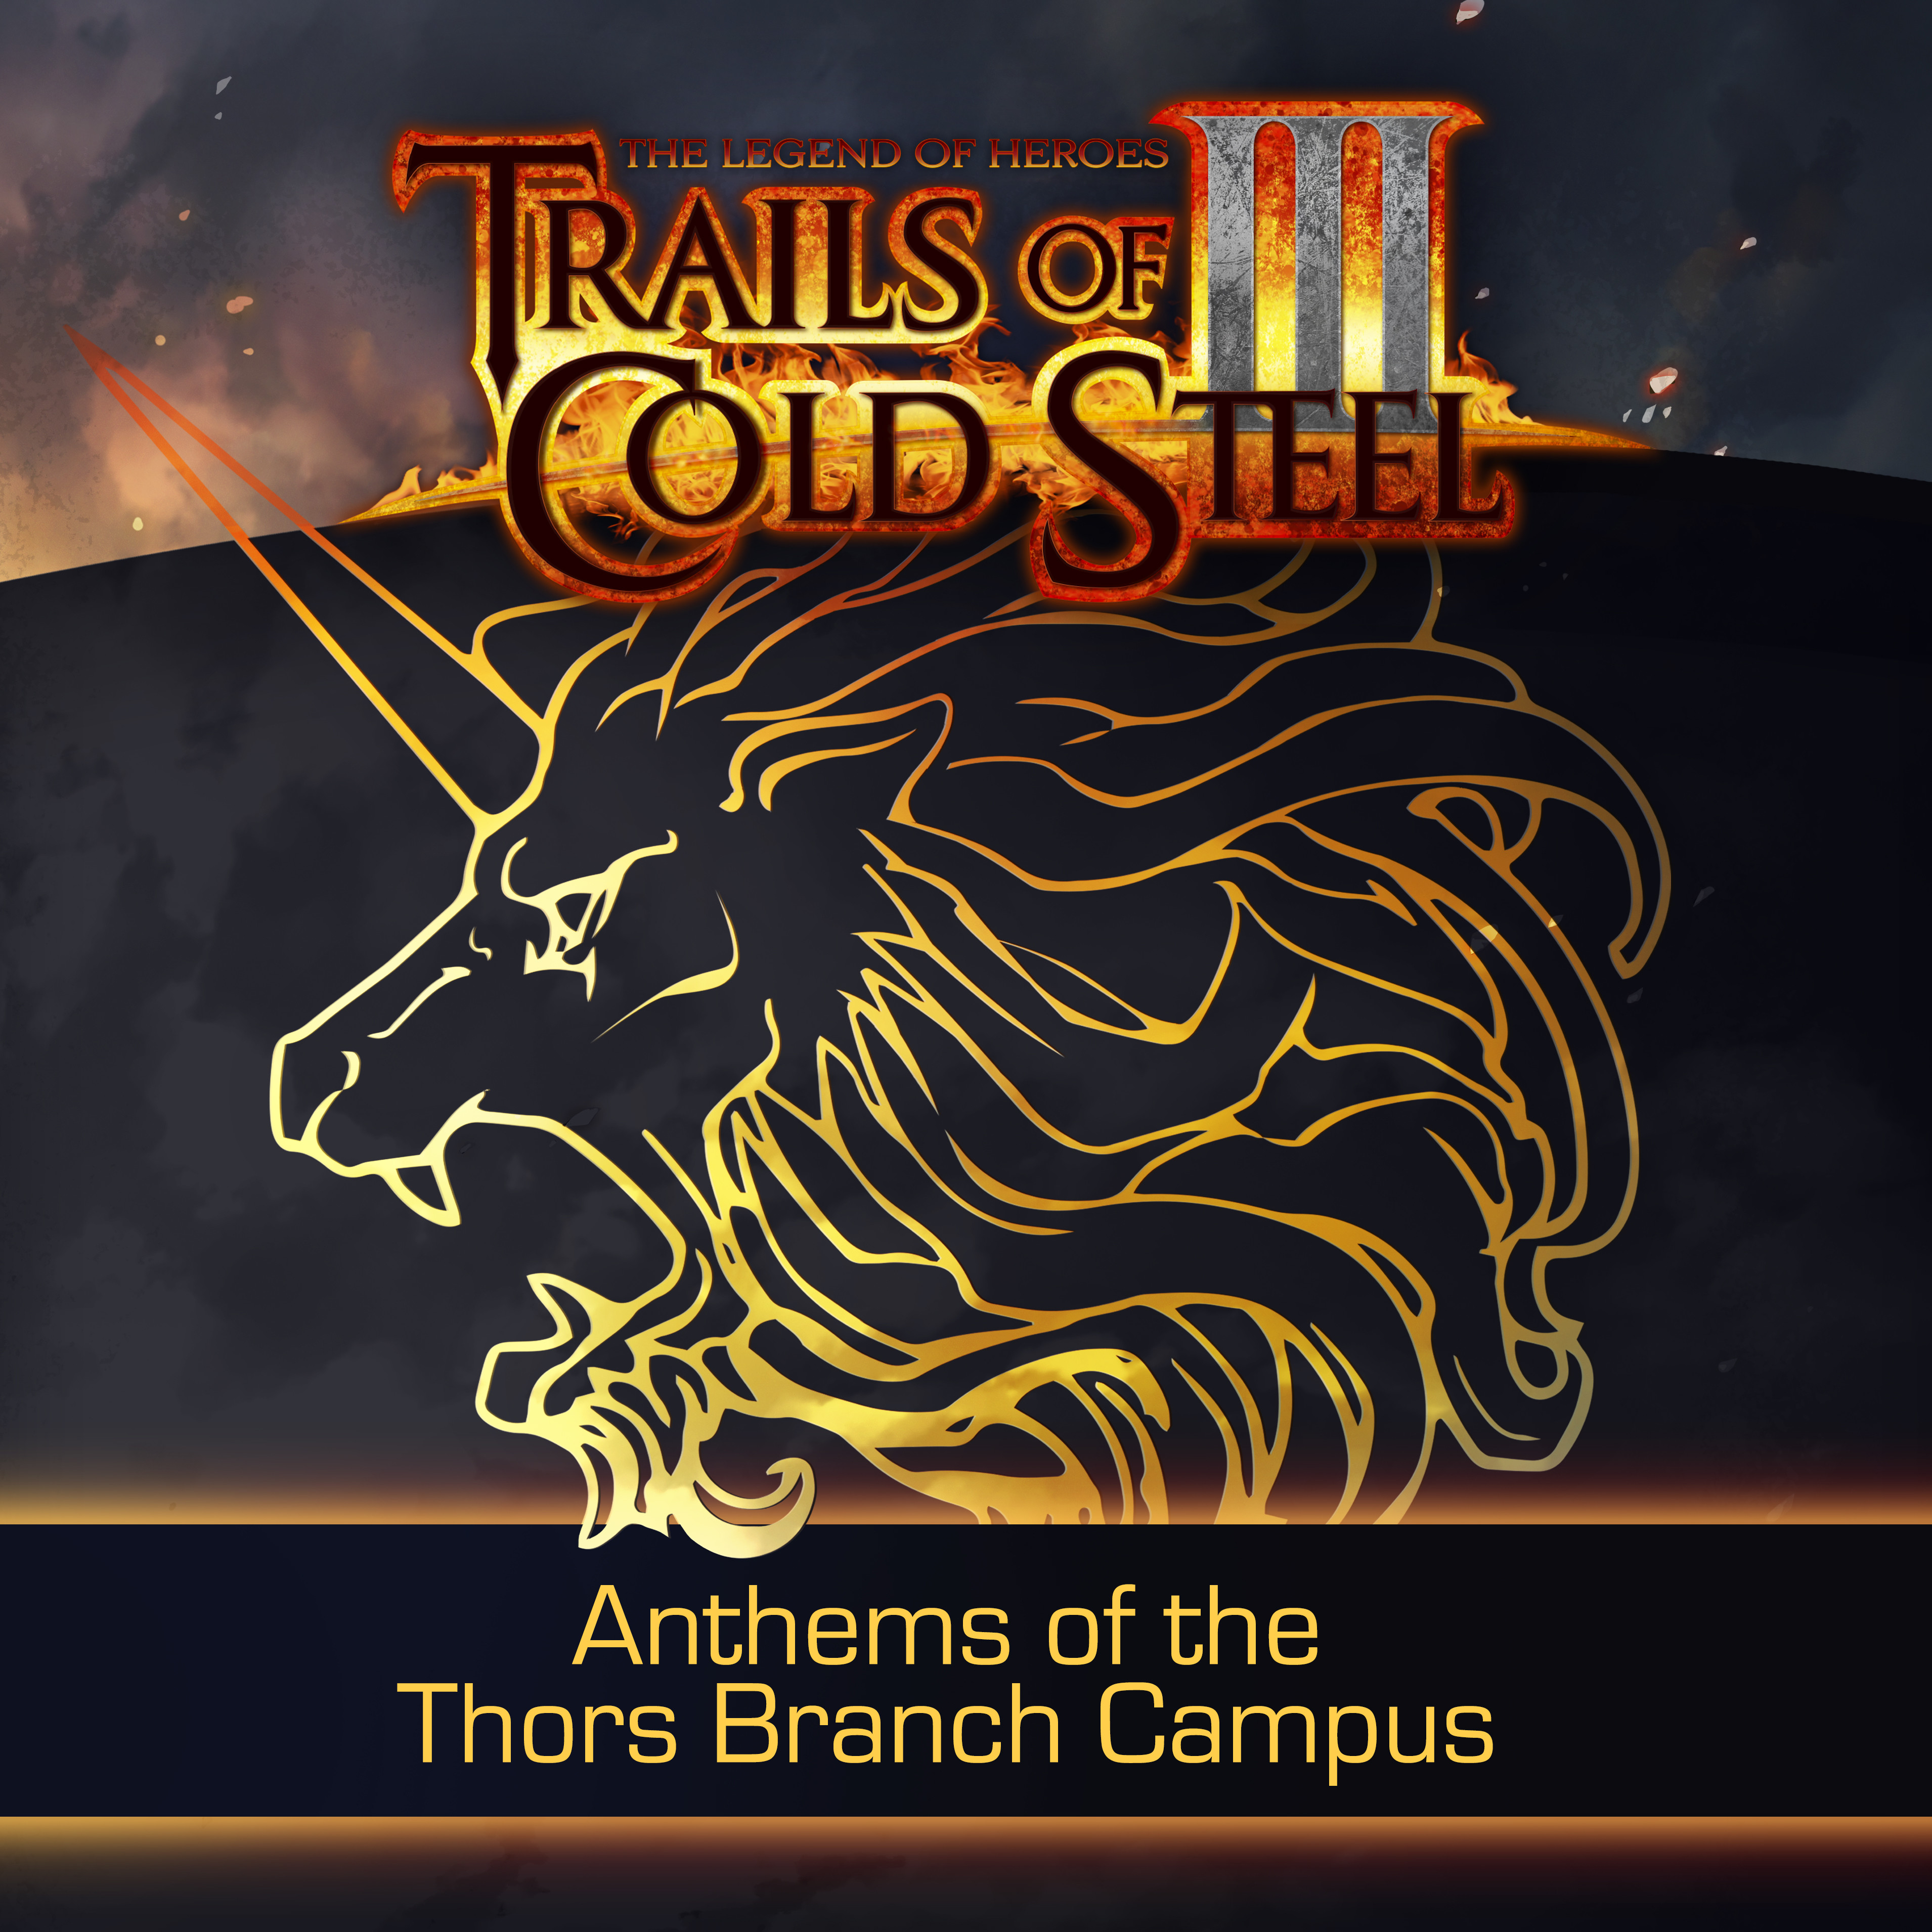 The Legend of Heroes: Trails of Cold Steel III  - Anthems of the Thors Branch Campus Digital Soundtrack Sampler screenshot